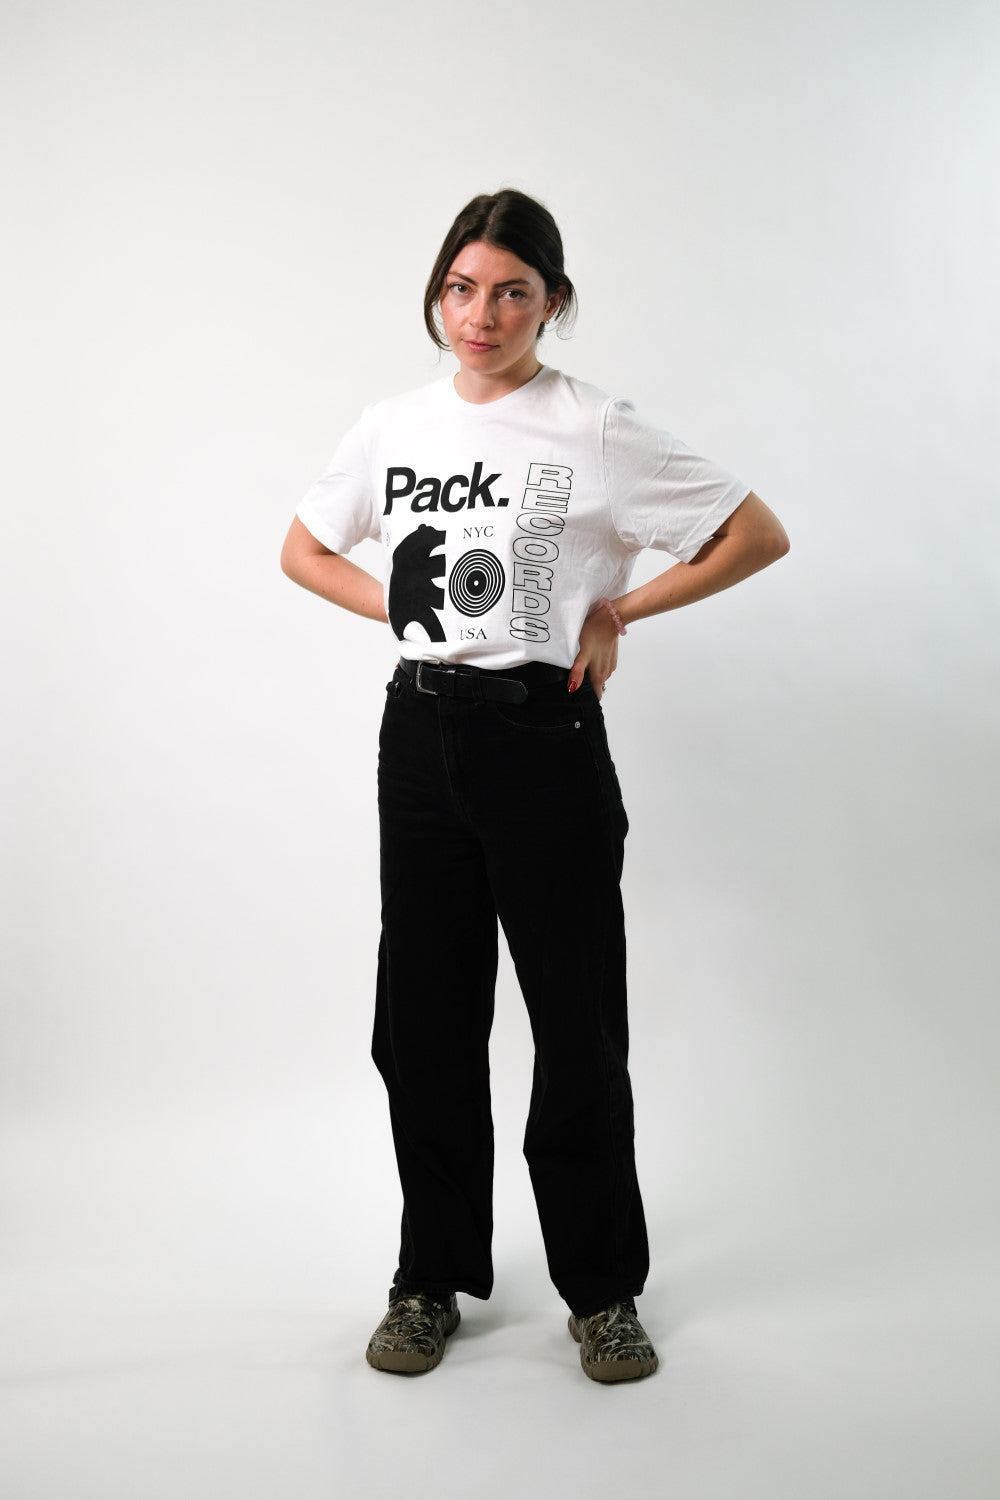 Pack Records - White Tee